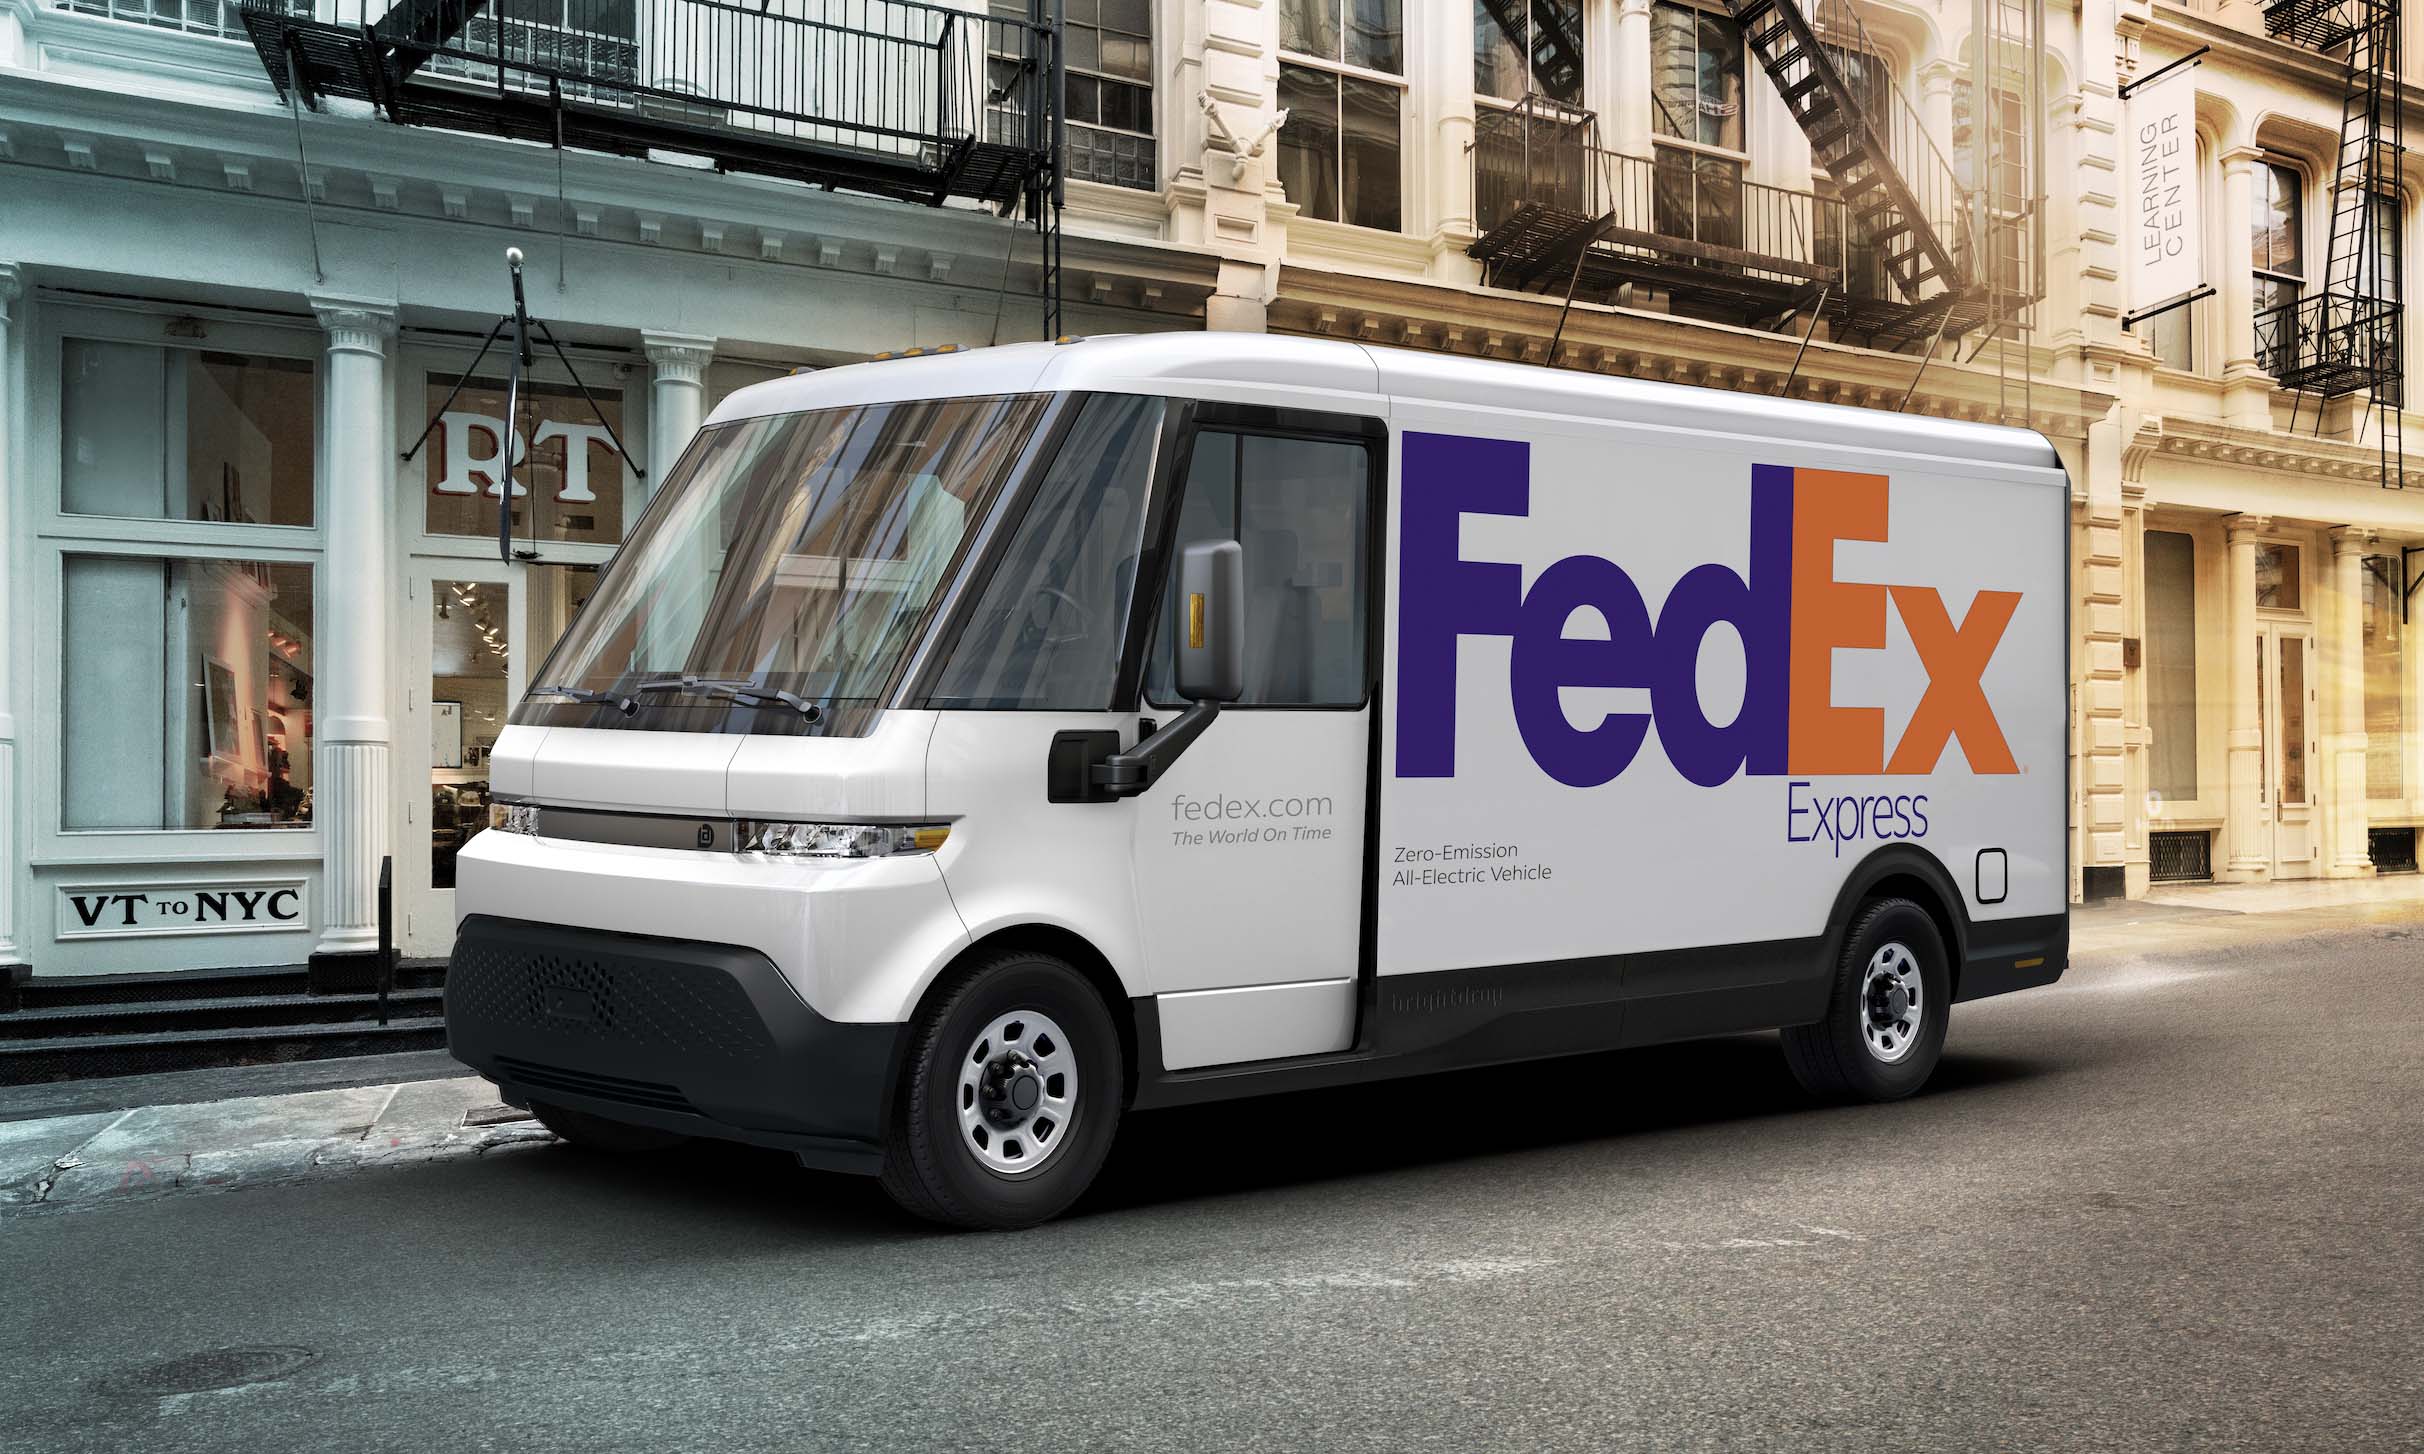 An all-electric FedEx van is parked on a city street.